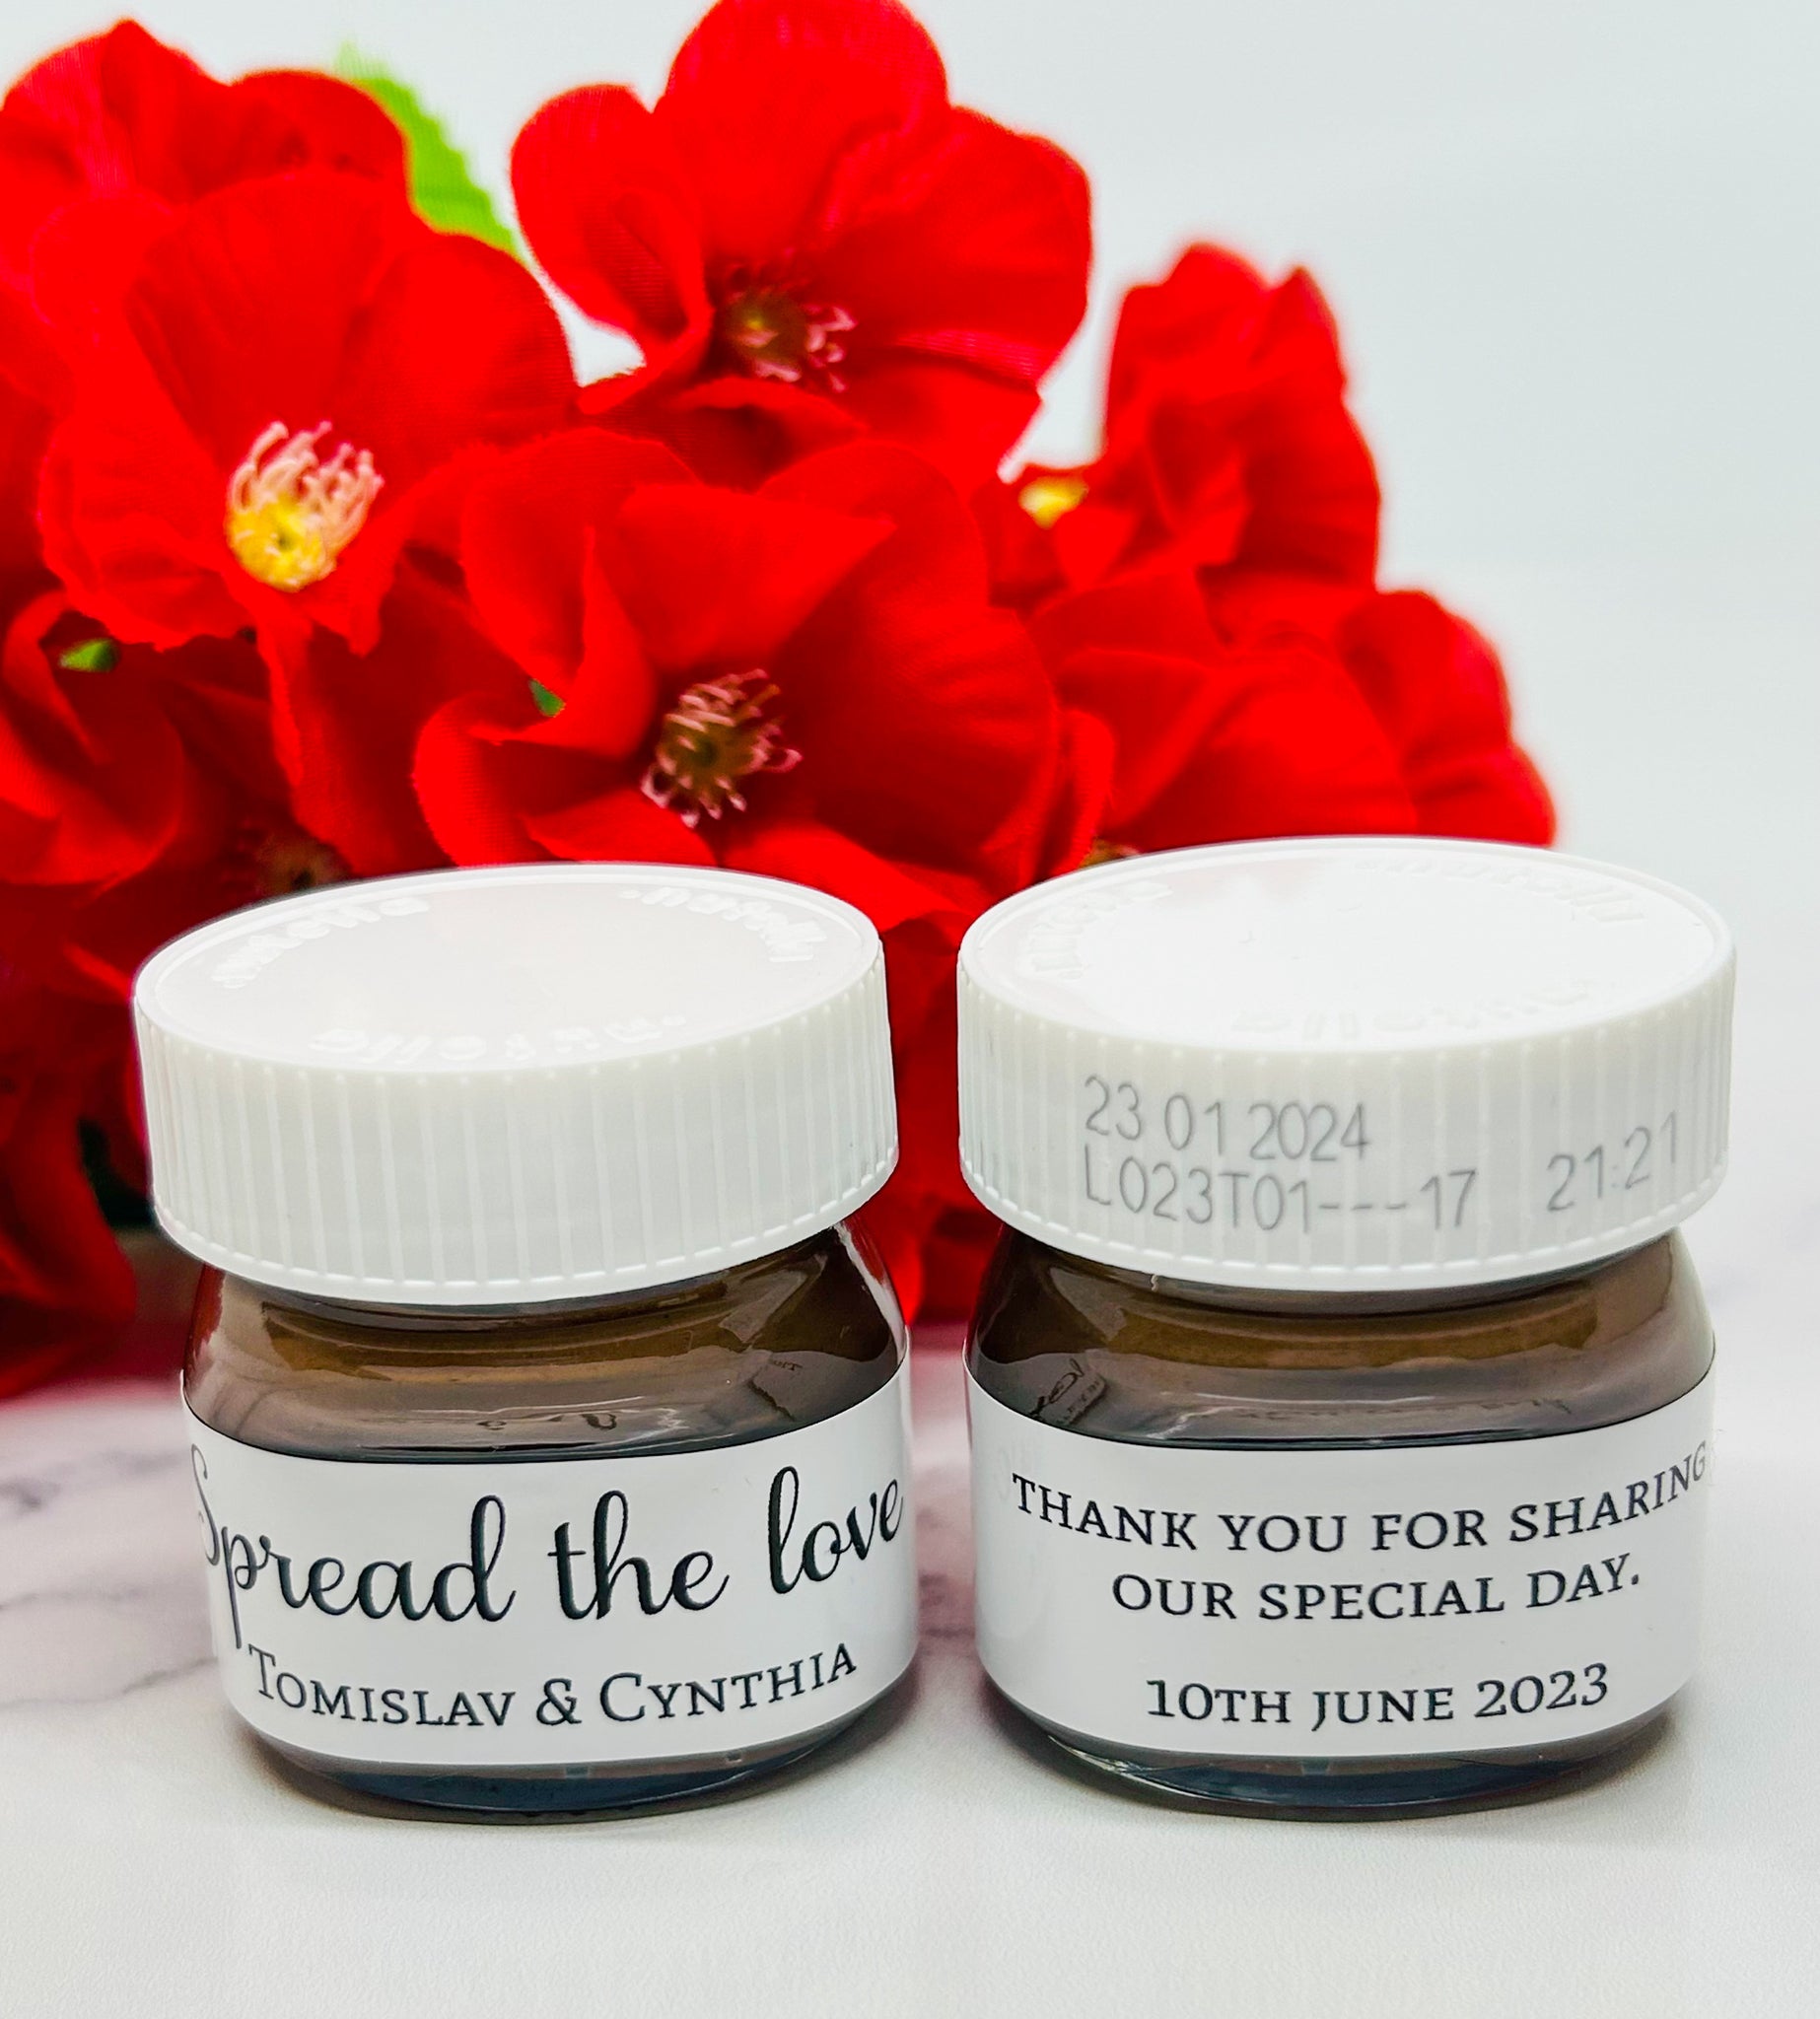 32 personalised personalized Mini Nutella labels favours / wedding /  communion / baby shower DIGITAL